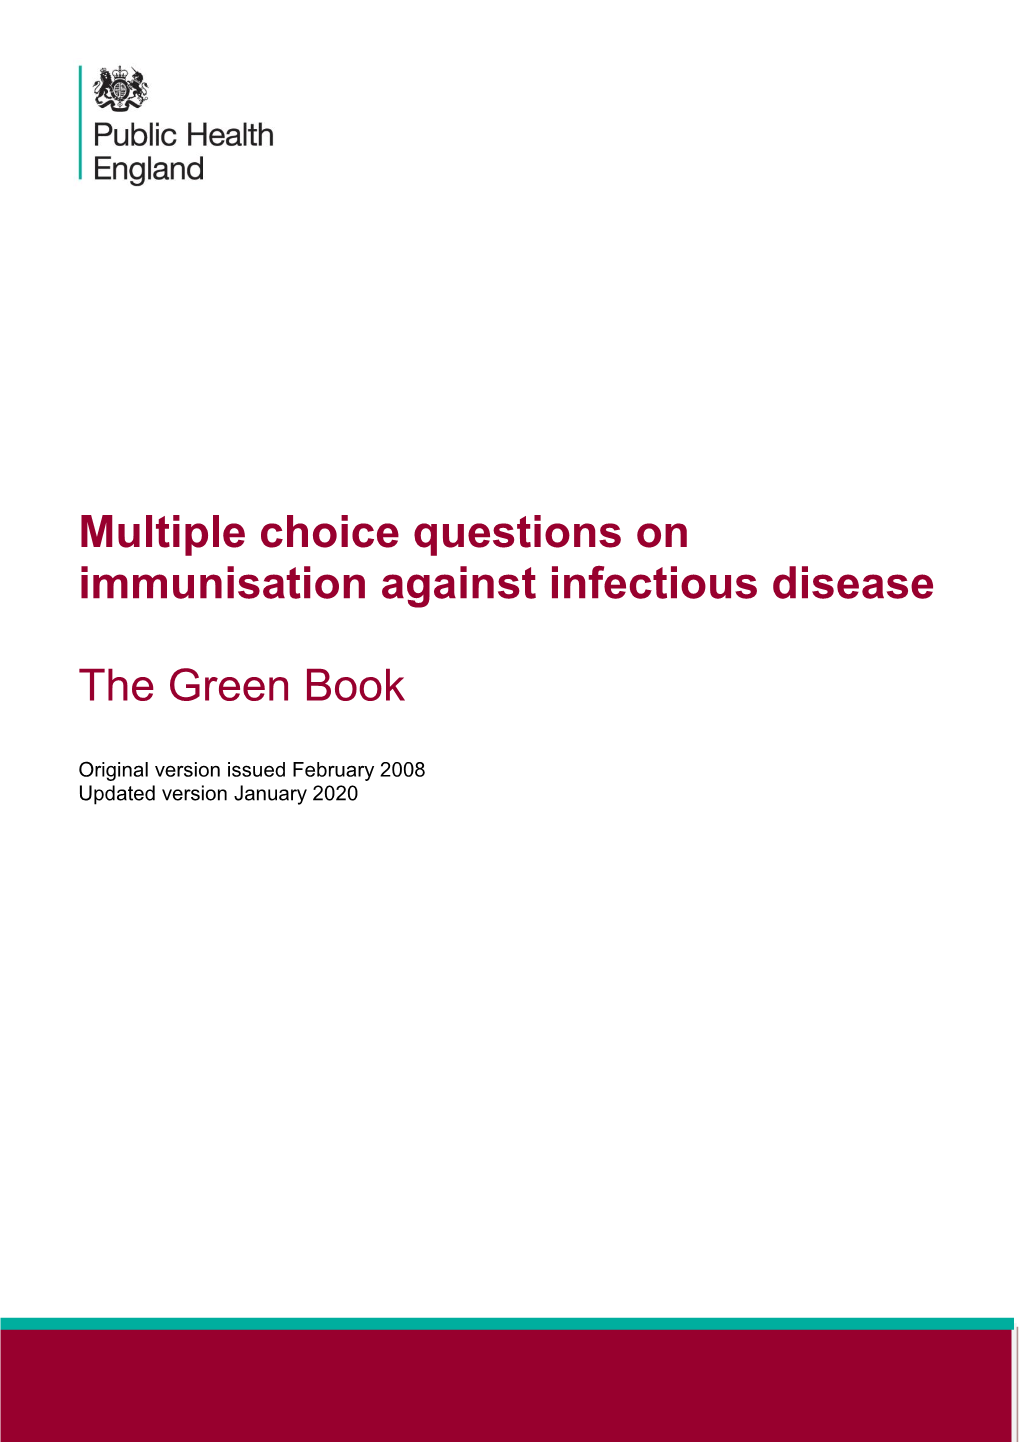 Multiple Choice Questions on Immunisation Against Infectious Disease